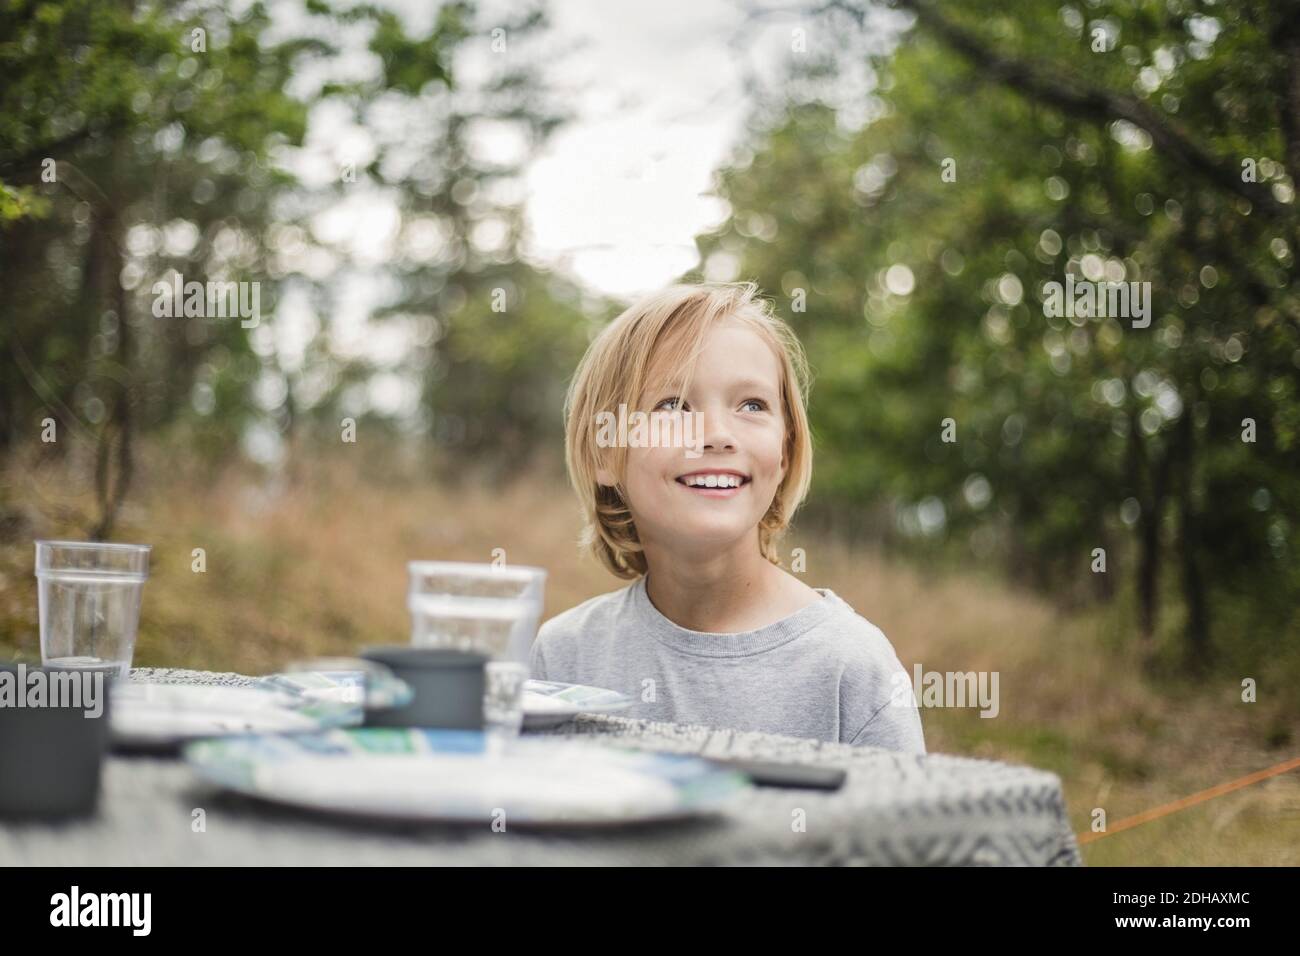 Smiling girl looking away while sitting at table in forest Stock Photo